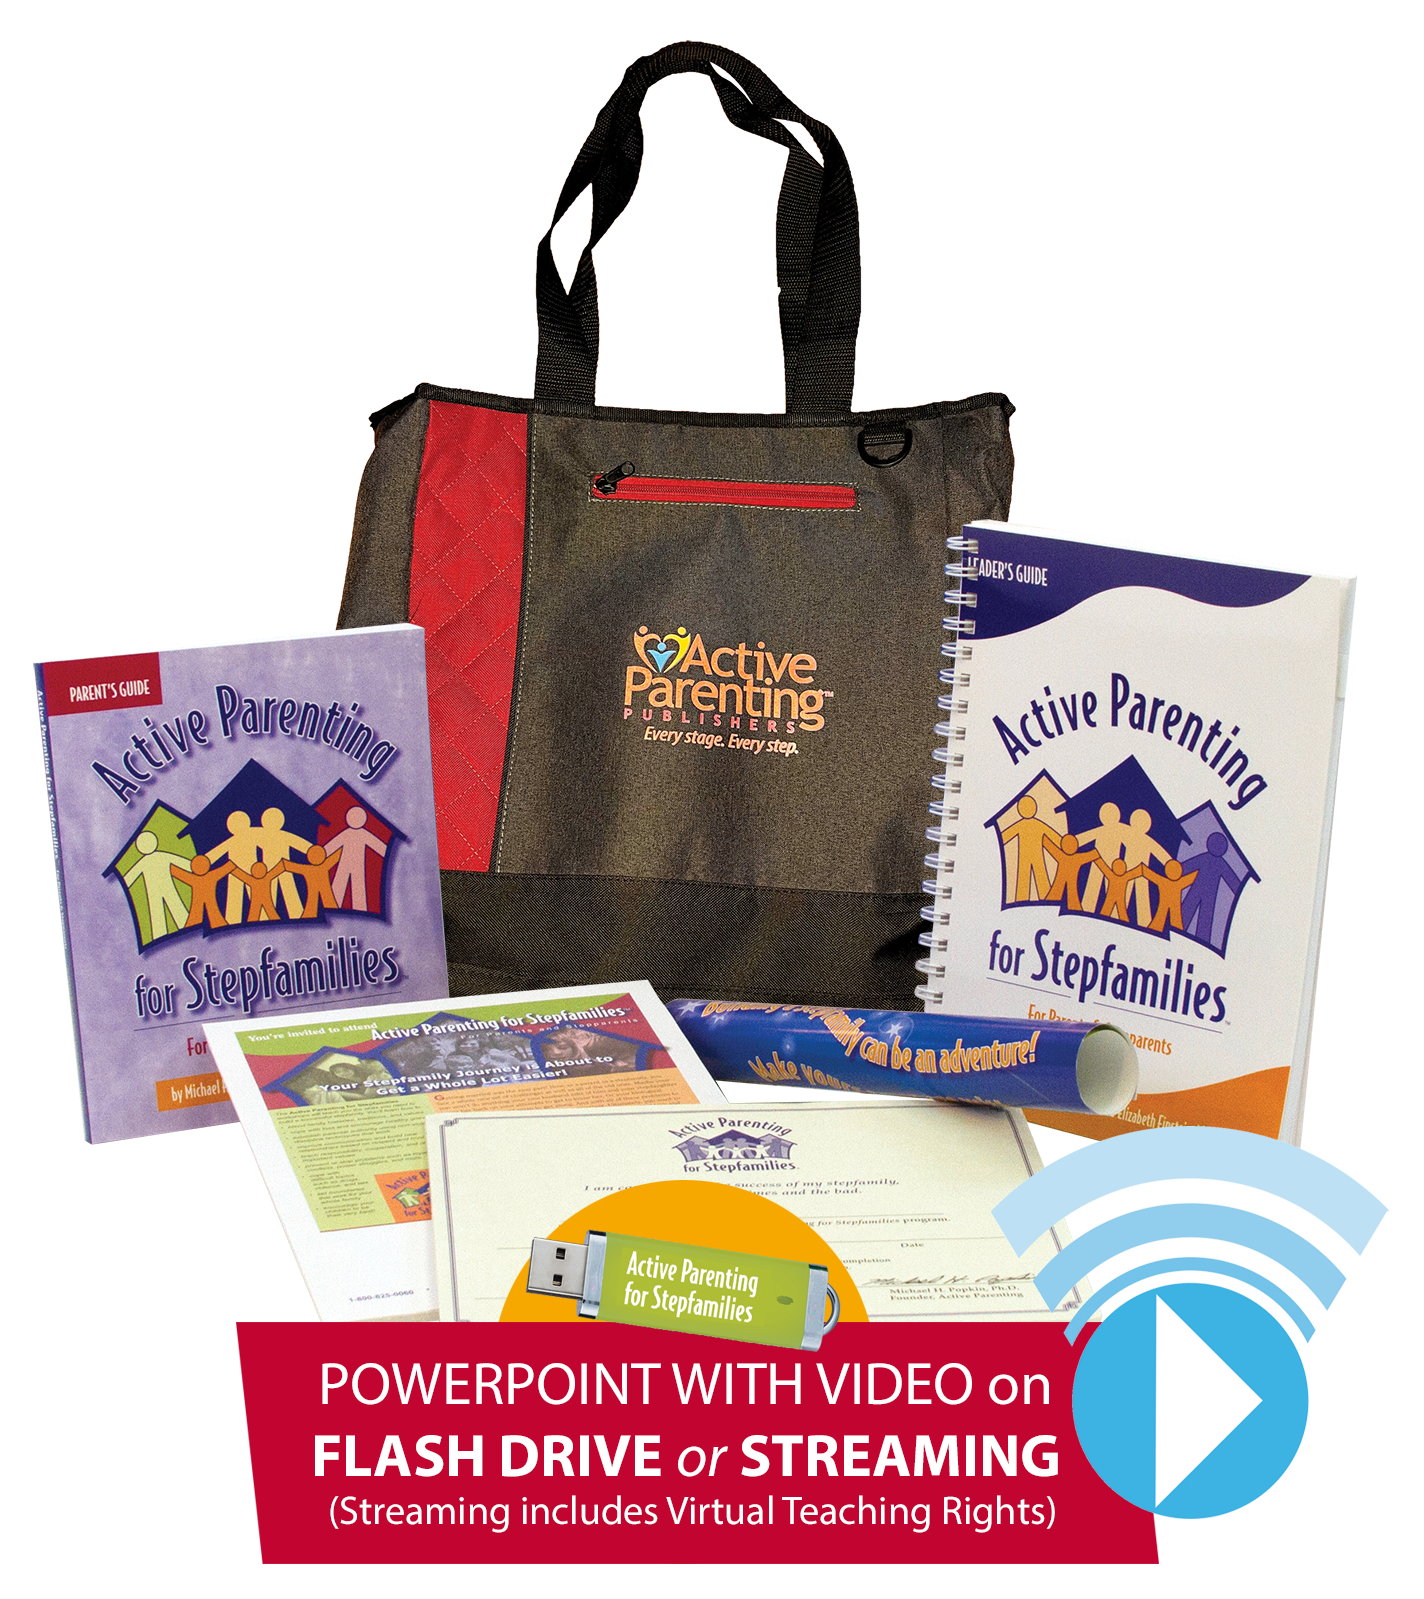 Active Parenting for Stepfamilies Program Kit on Flash Drive or Streaming